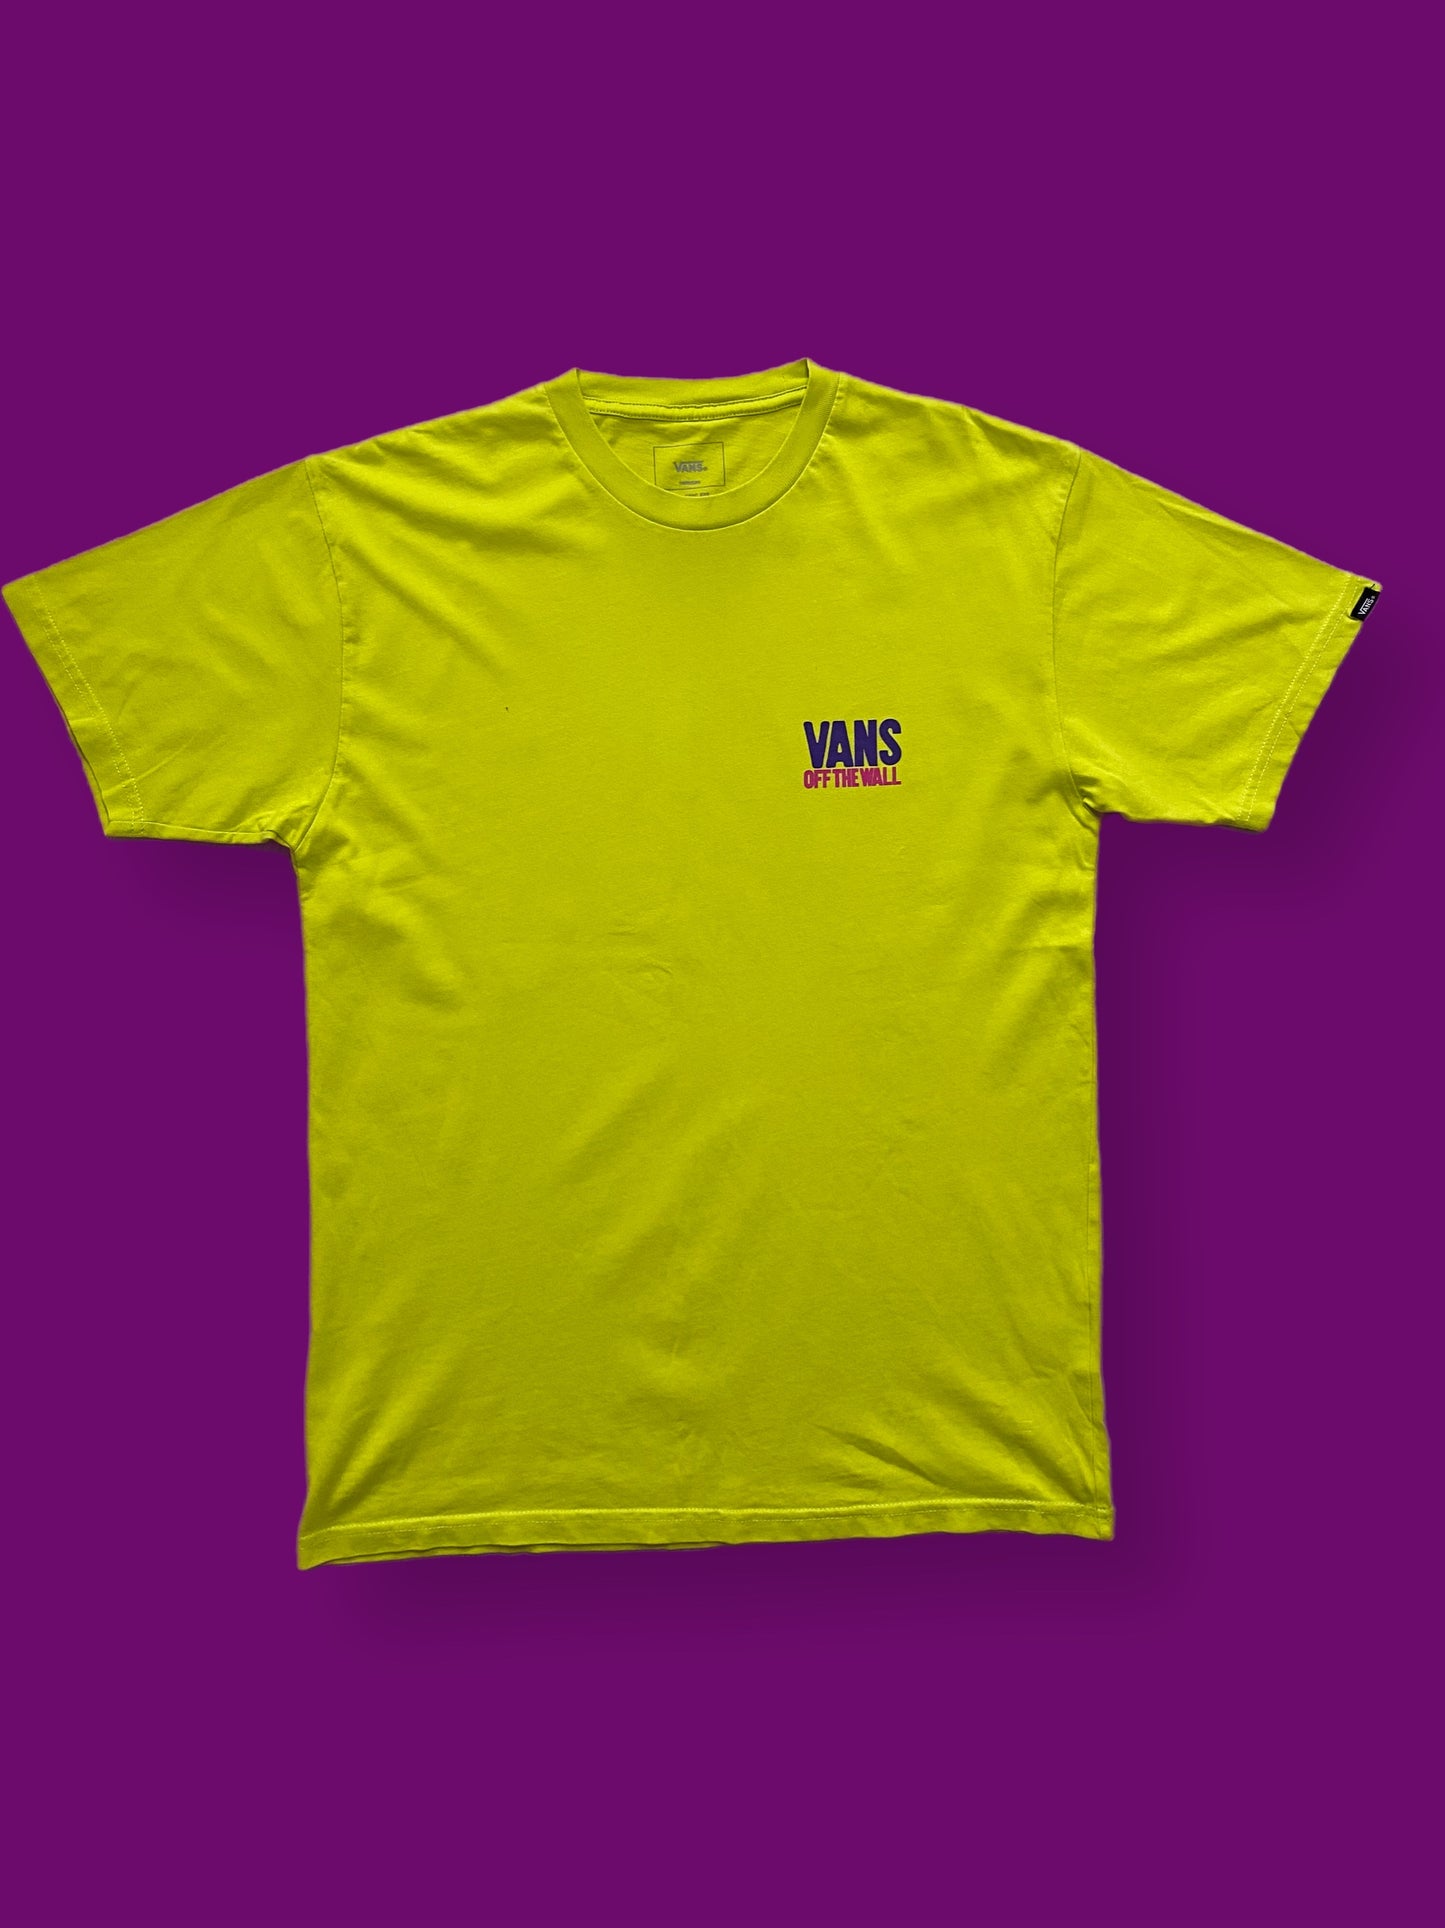 Vans of The Wall T-Shirt